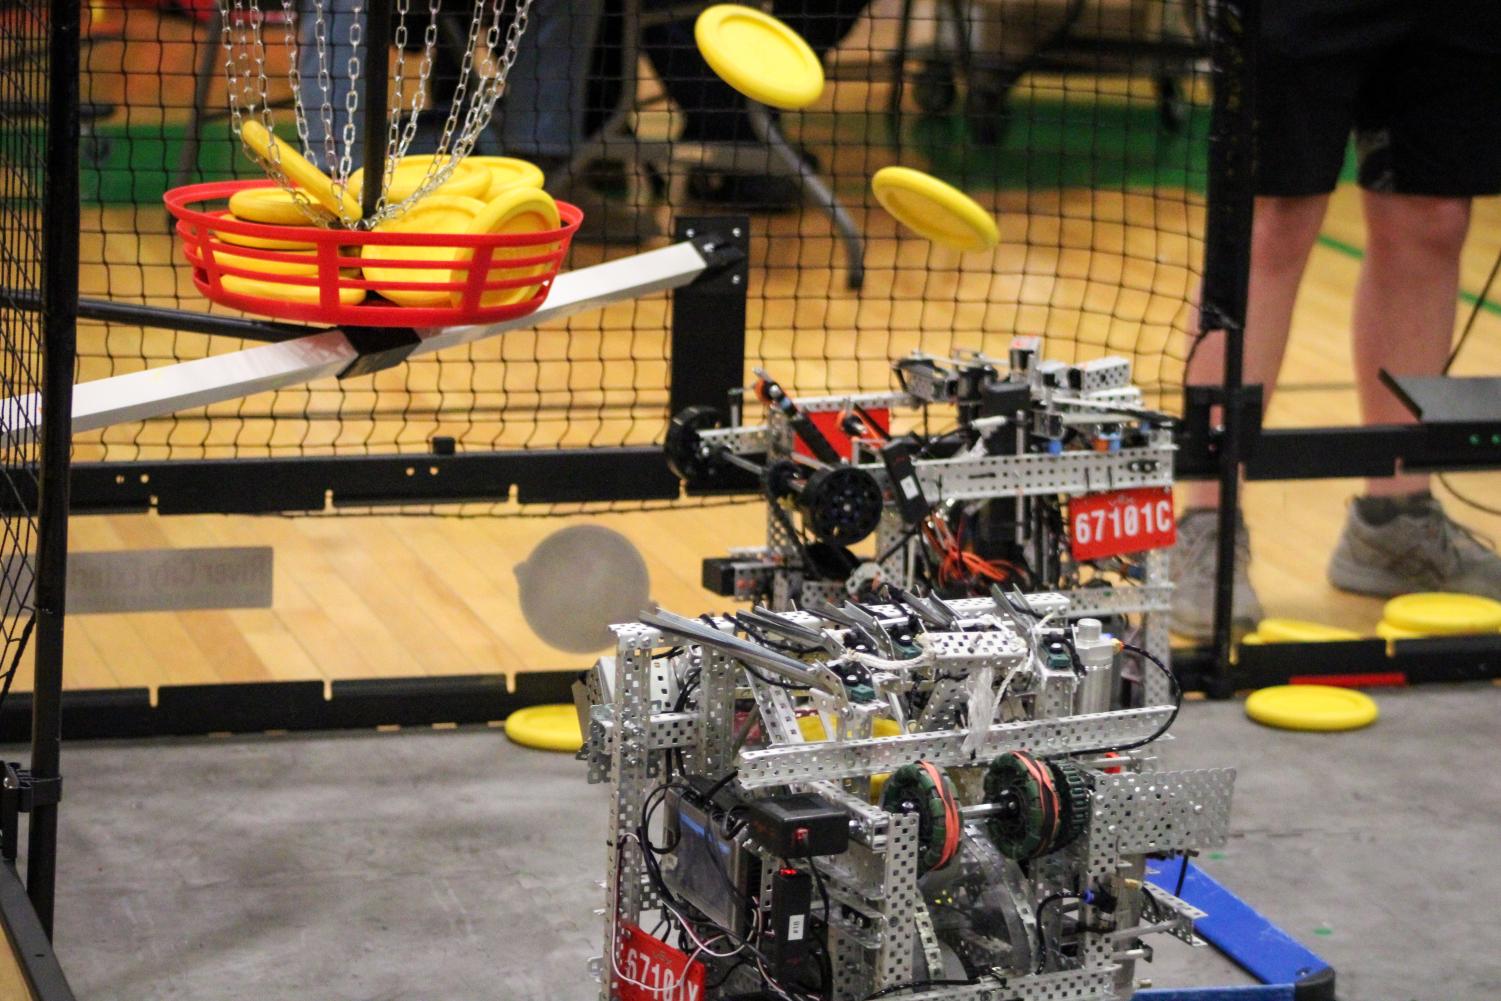 Robotics+competition+%28Photos+by+Abigail+Kuhn%29